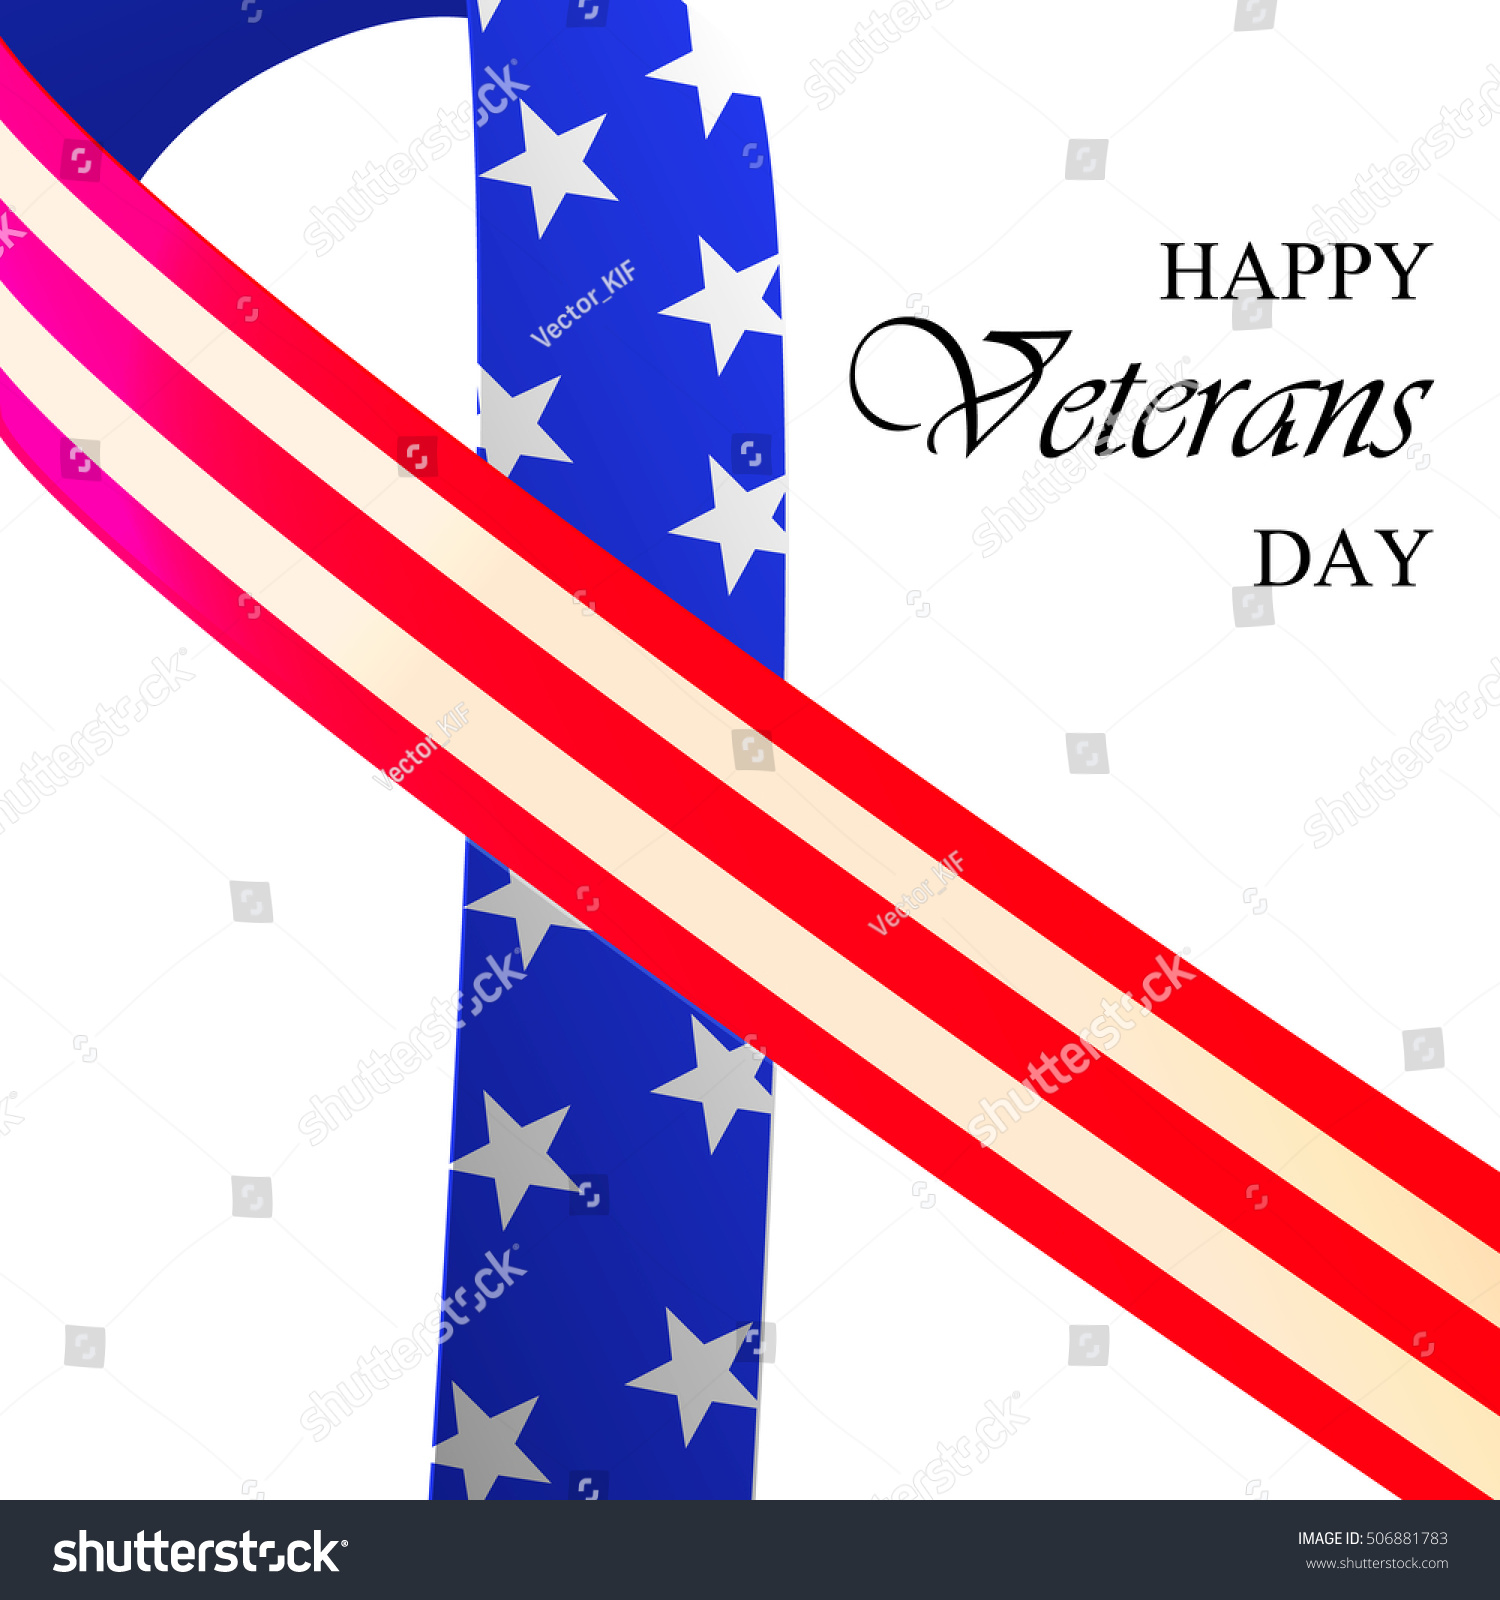 happy-veterans-day-ribbon-red-white-and-blue-ribbon-with-stars-stock